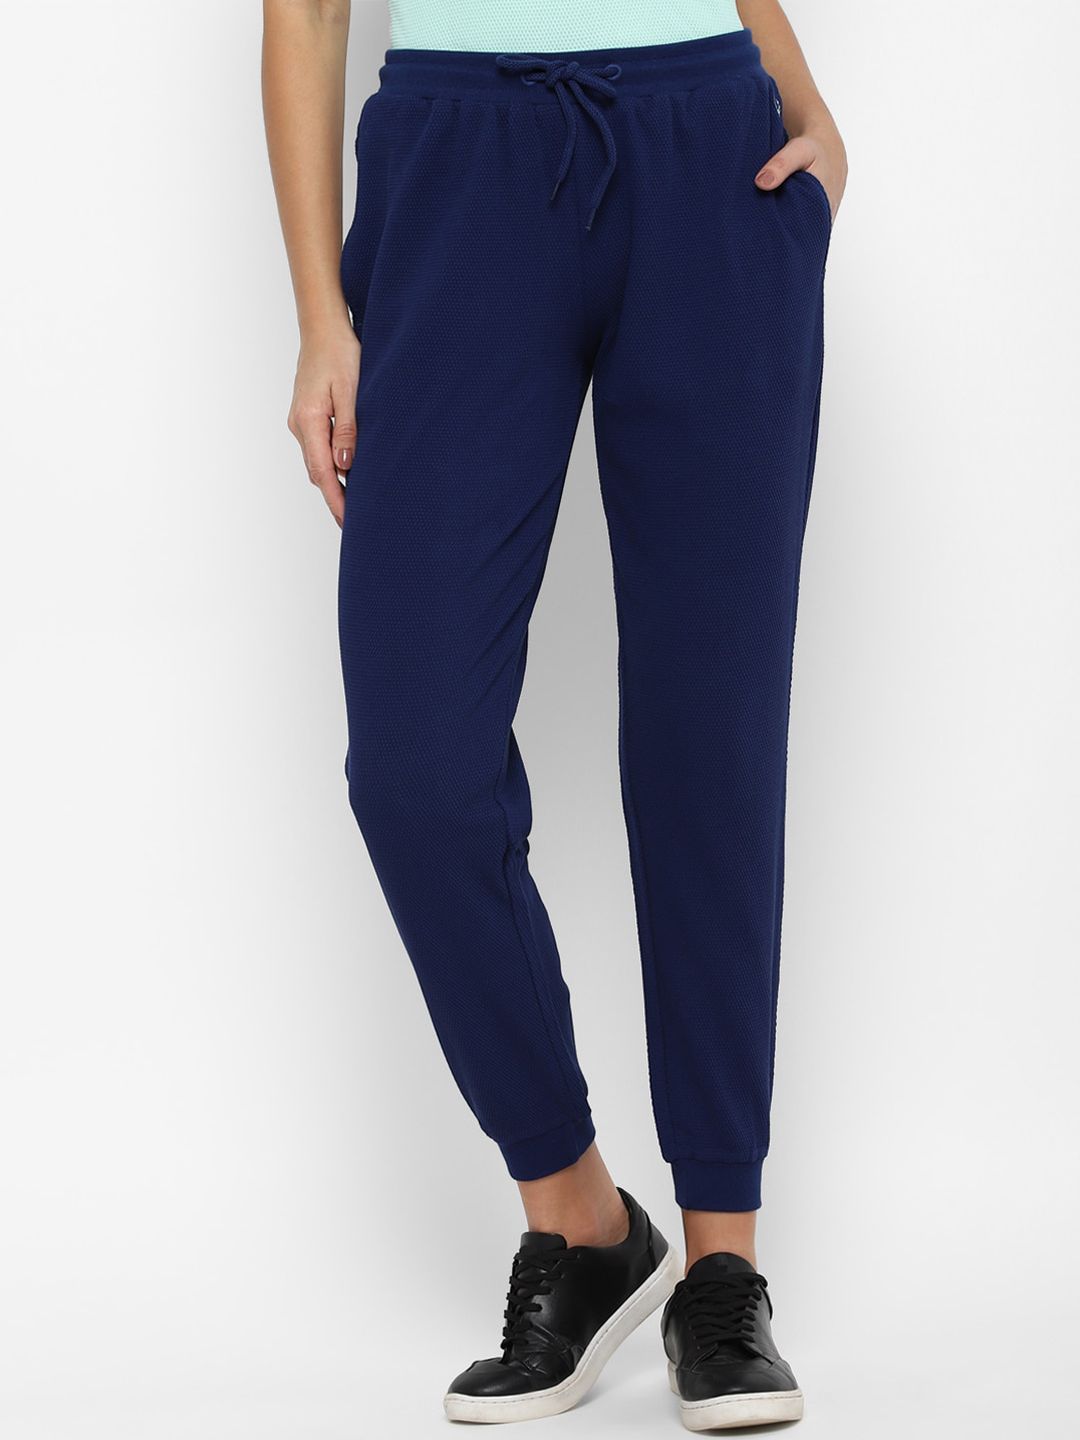 Allen Solly Woman Women Navy Blue Solid Cotton Joggers Price in India